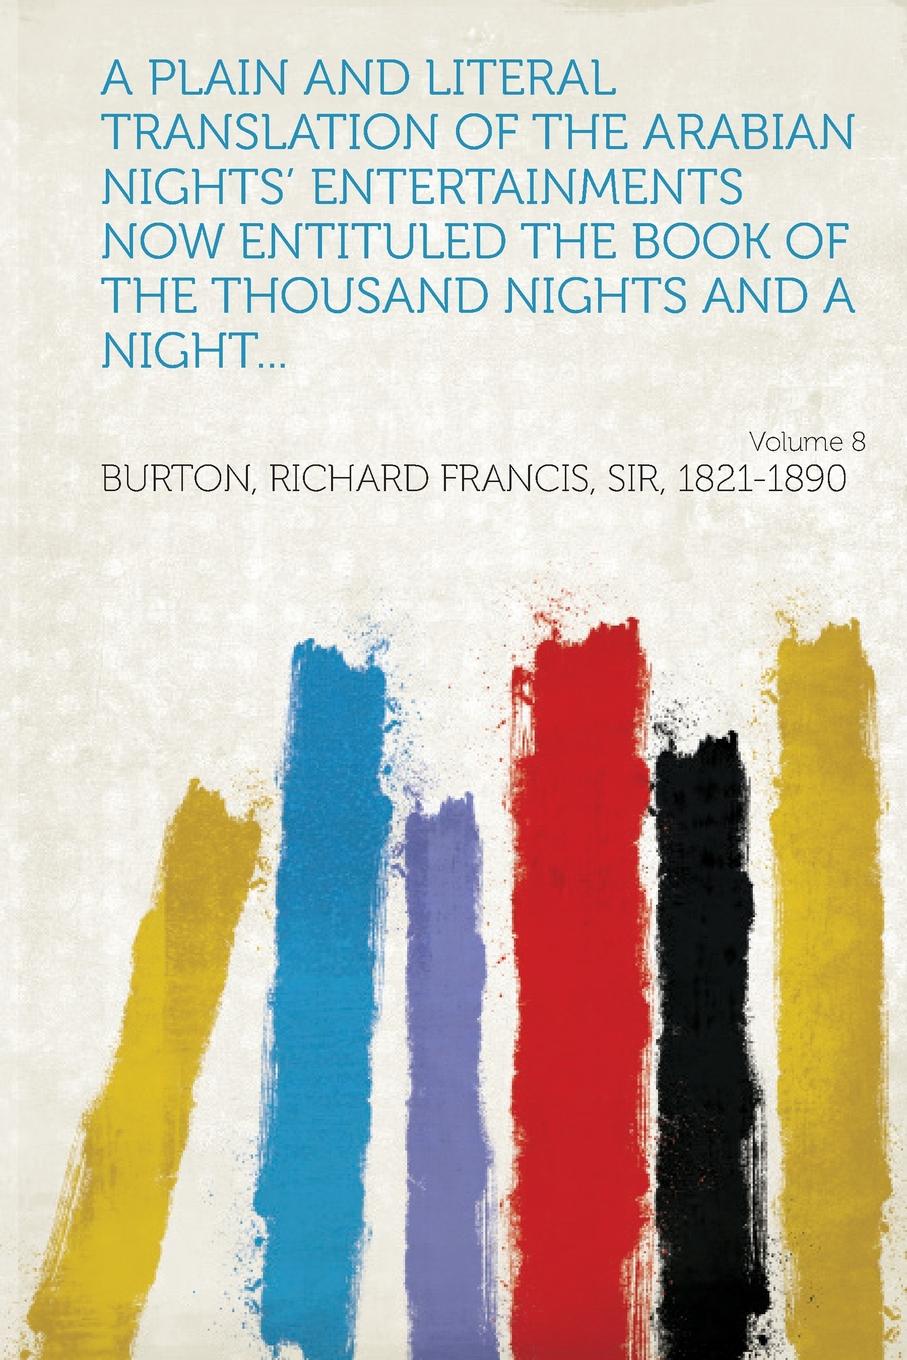 A Plain and Literal Translation of the Arabian Nights. Entertainments Now Entituled the Book of the Thousand Nights and a Night... Volume 8